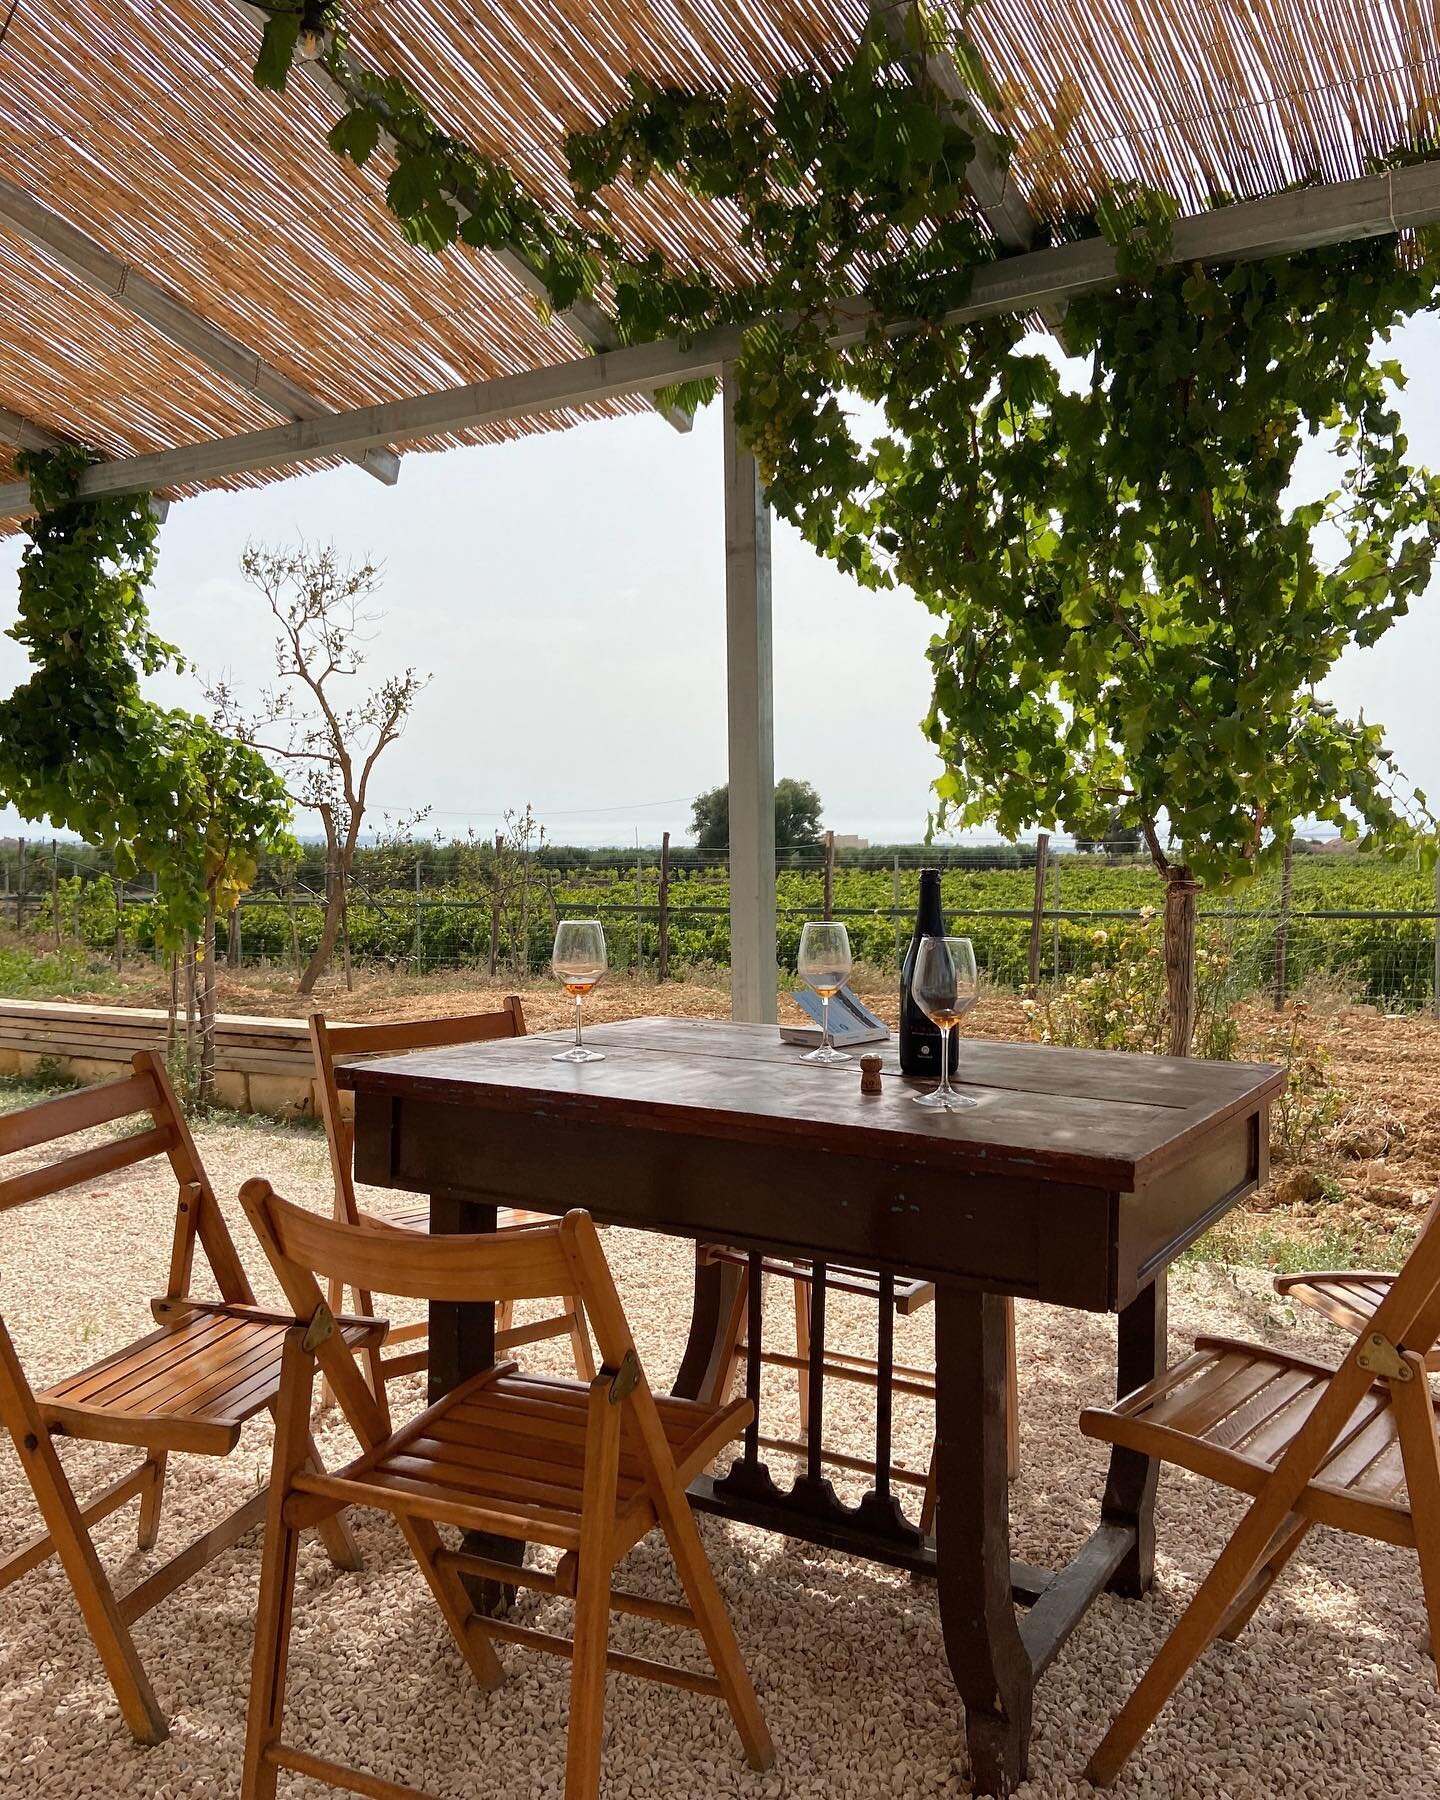 For our tasting table series&hellip; a hazy afternoon in Marsala. ☁️🌞☁️